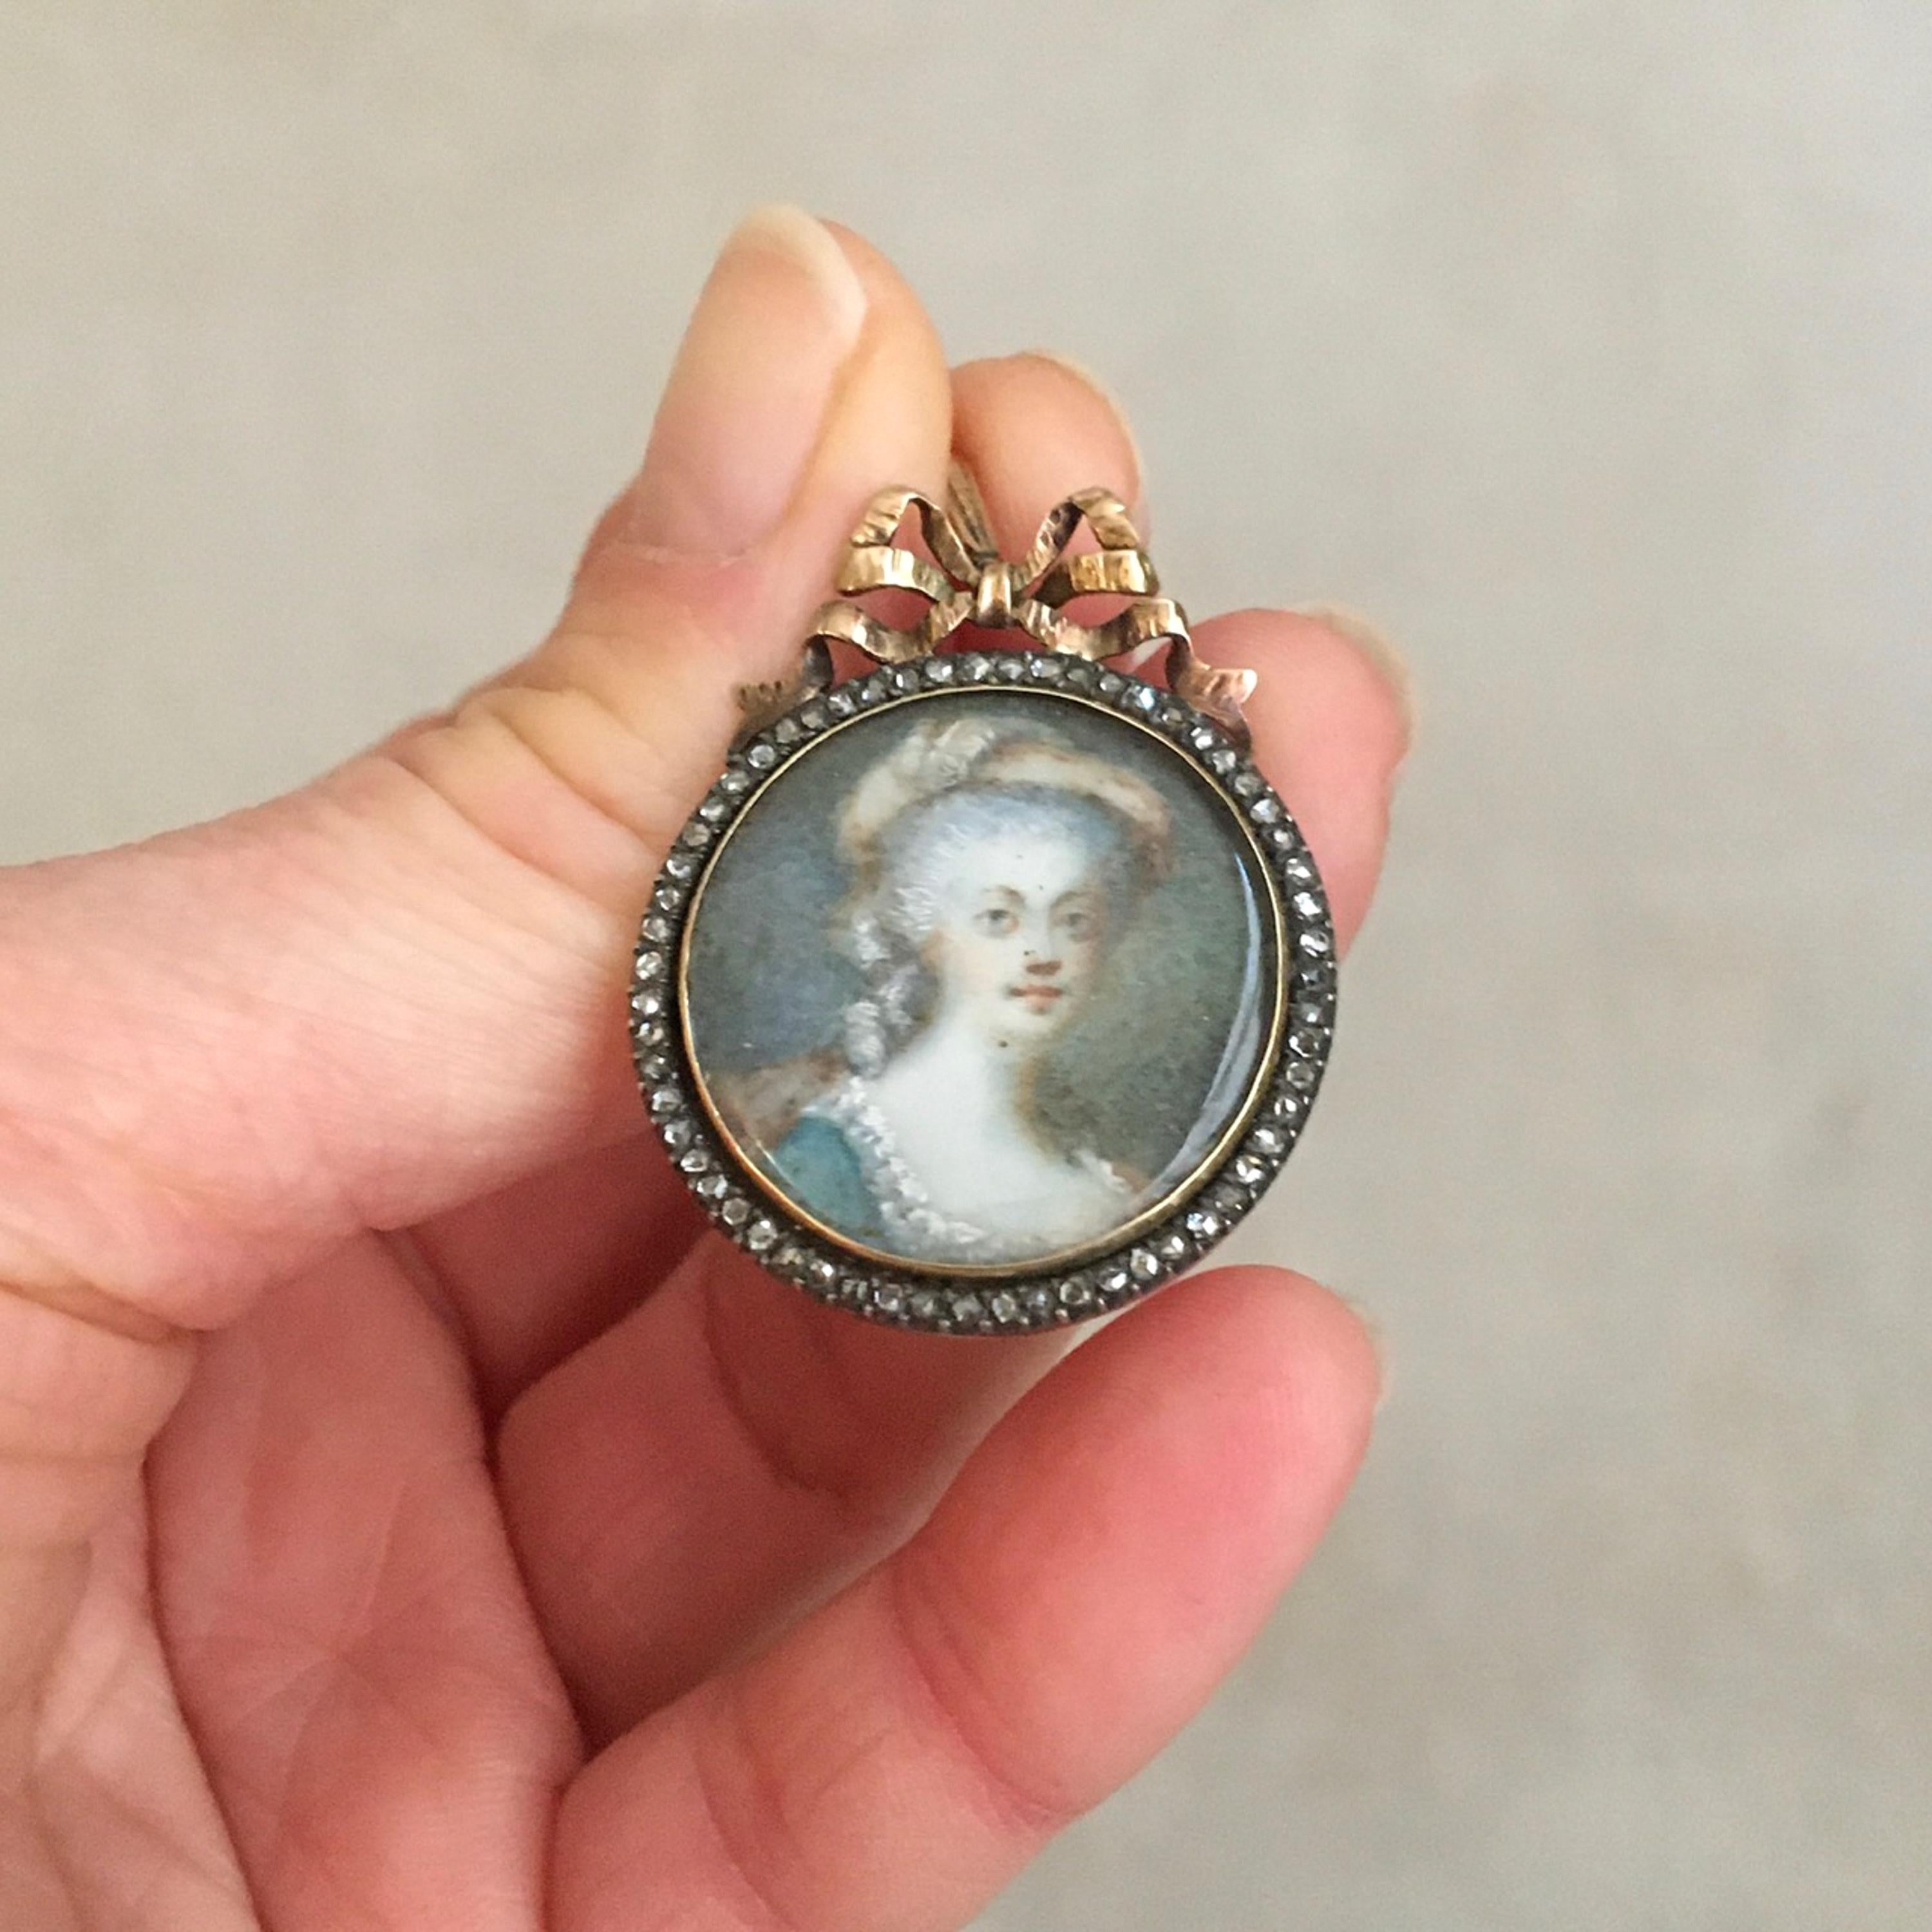 A beautiful antique Georgian (1714 to ca. 1830-1837) 14 karat gold miniature portrait pendant depicting a lady. This portrait, handmade in circa 1800, is painted in soft tones on presumably porcelain and the border is set with 59 rose cut diamonds